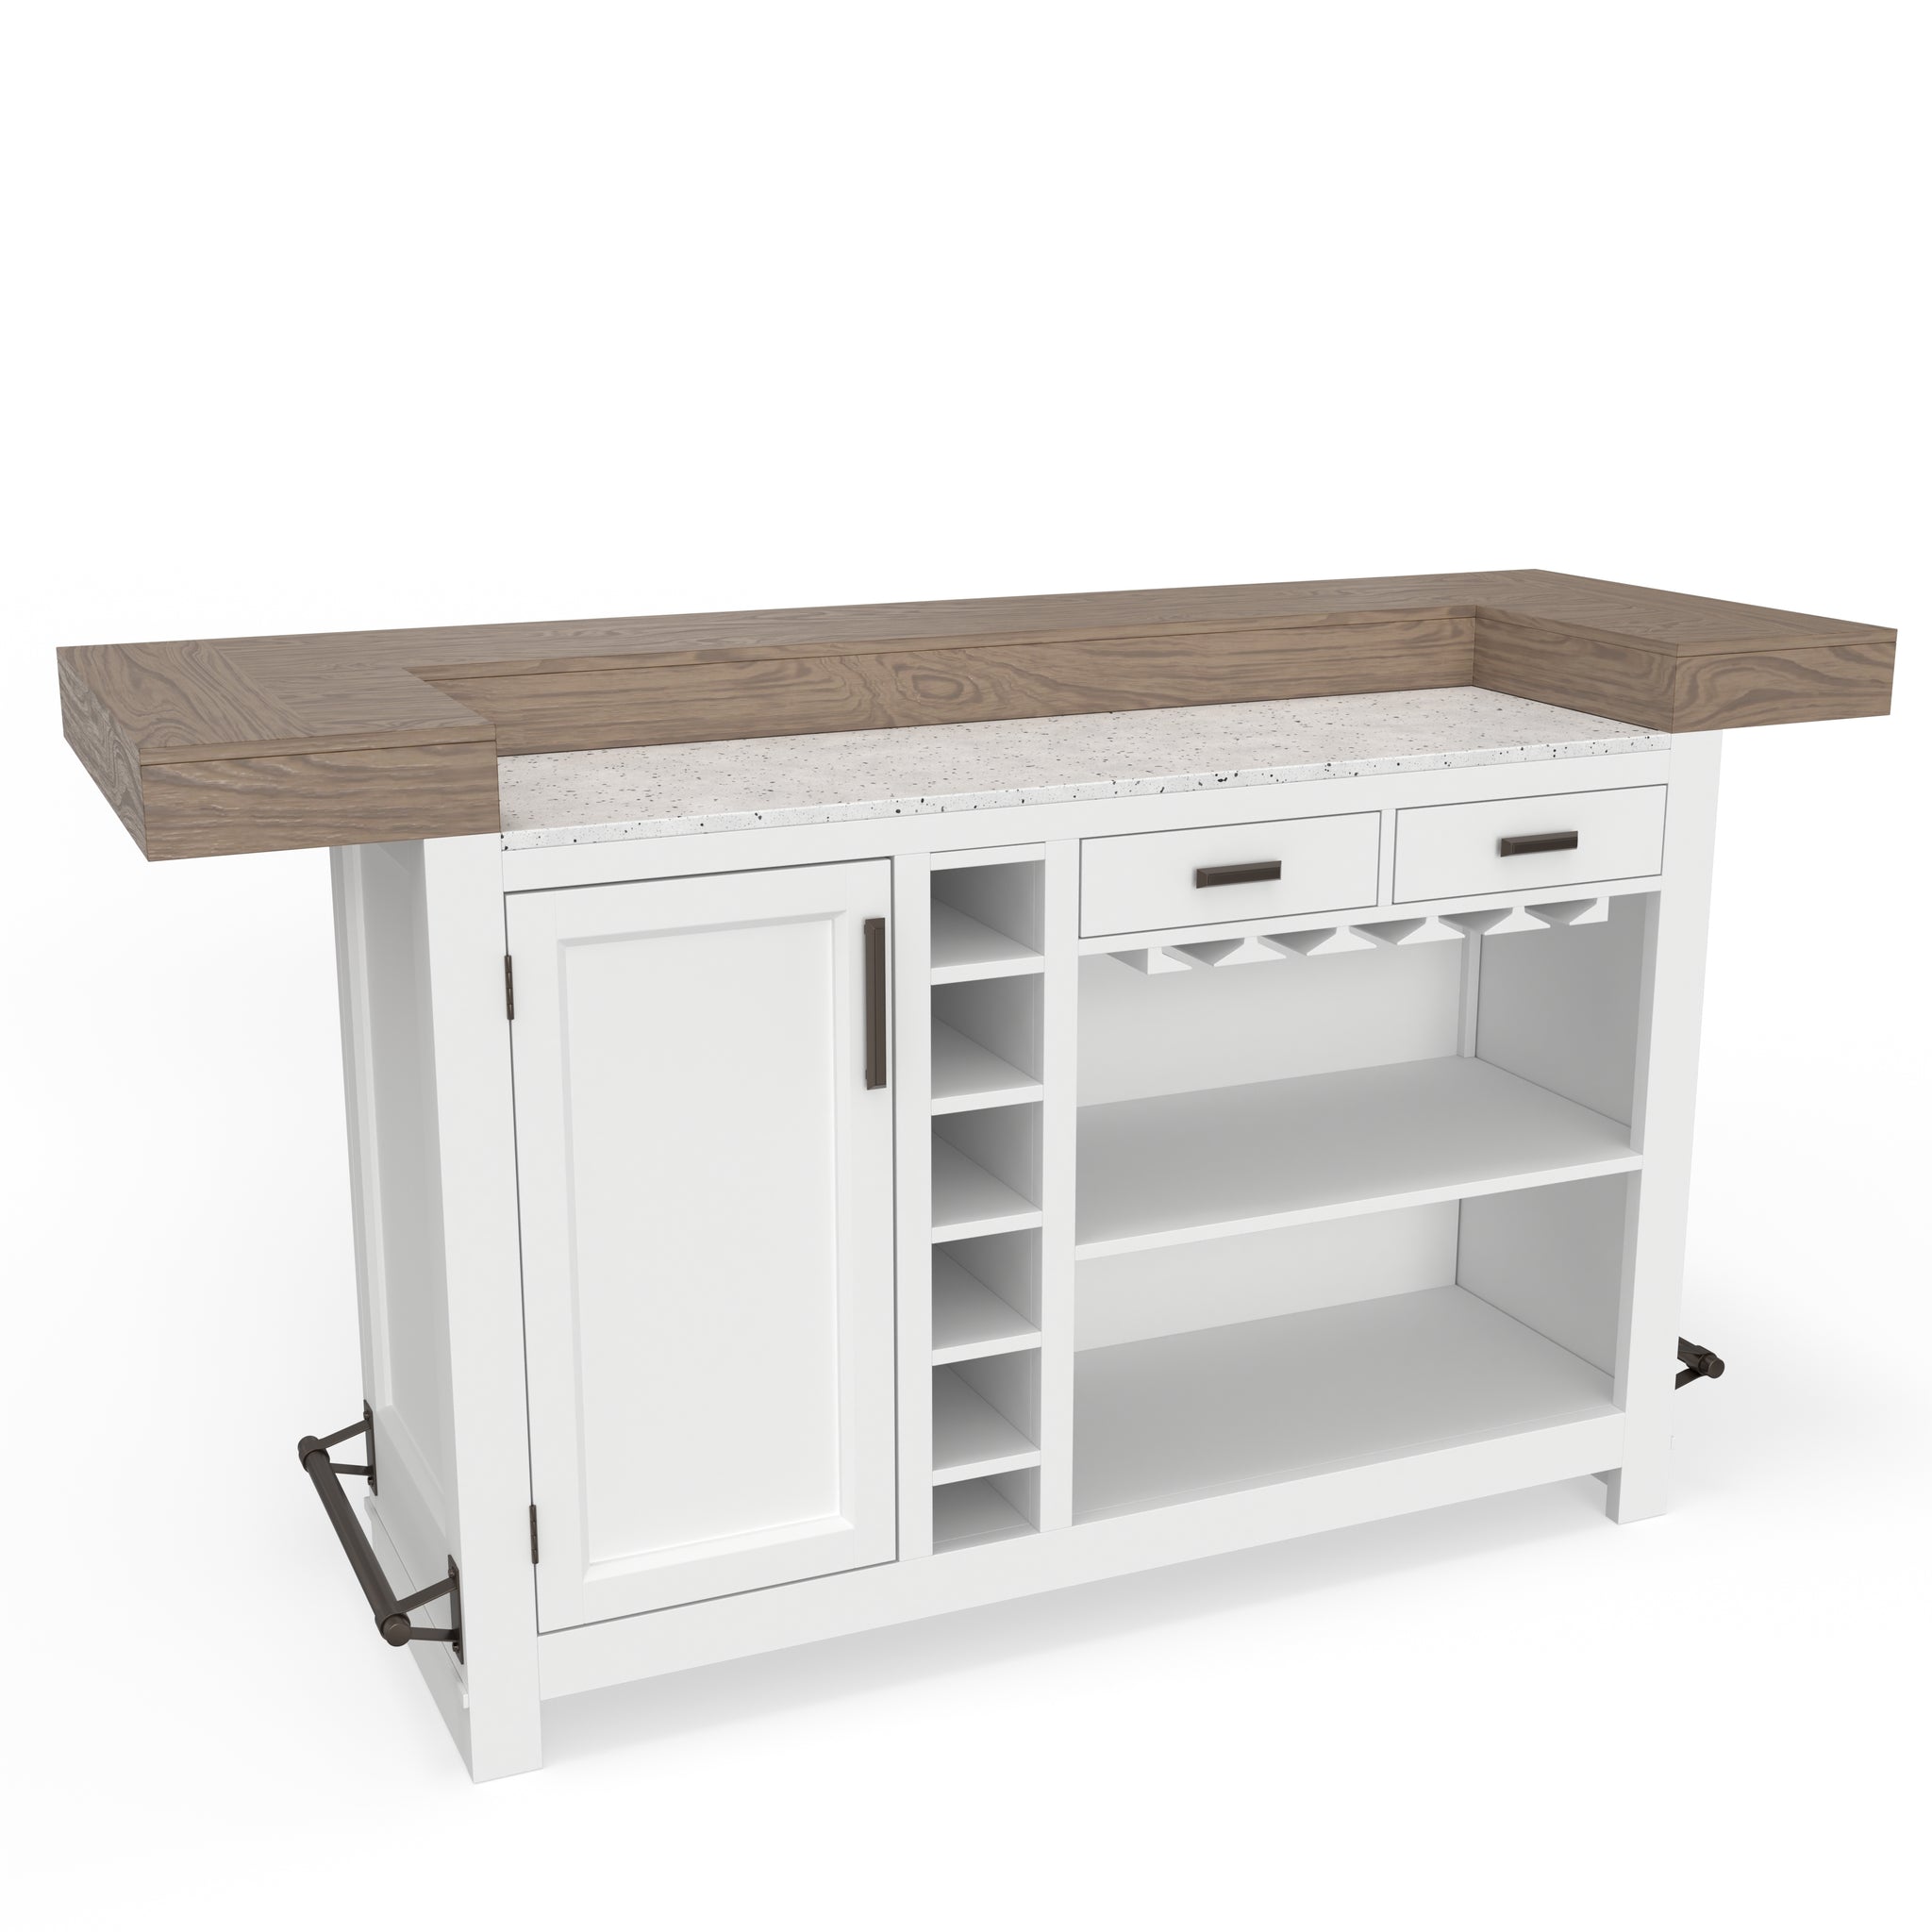 DINING 78 Complete Parker in. Furniture AMERICANA with MODERN House Bar quartz -